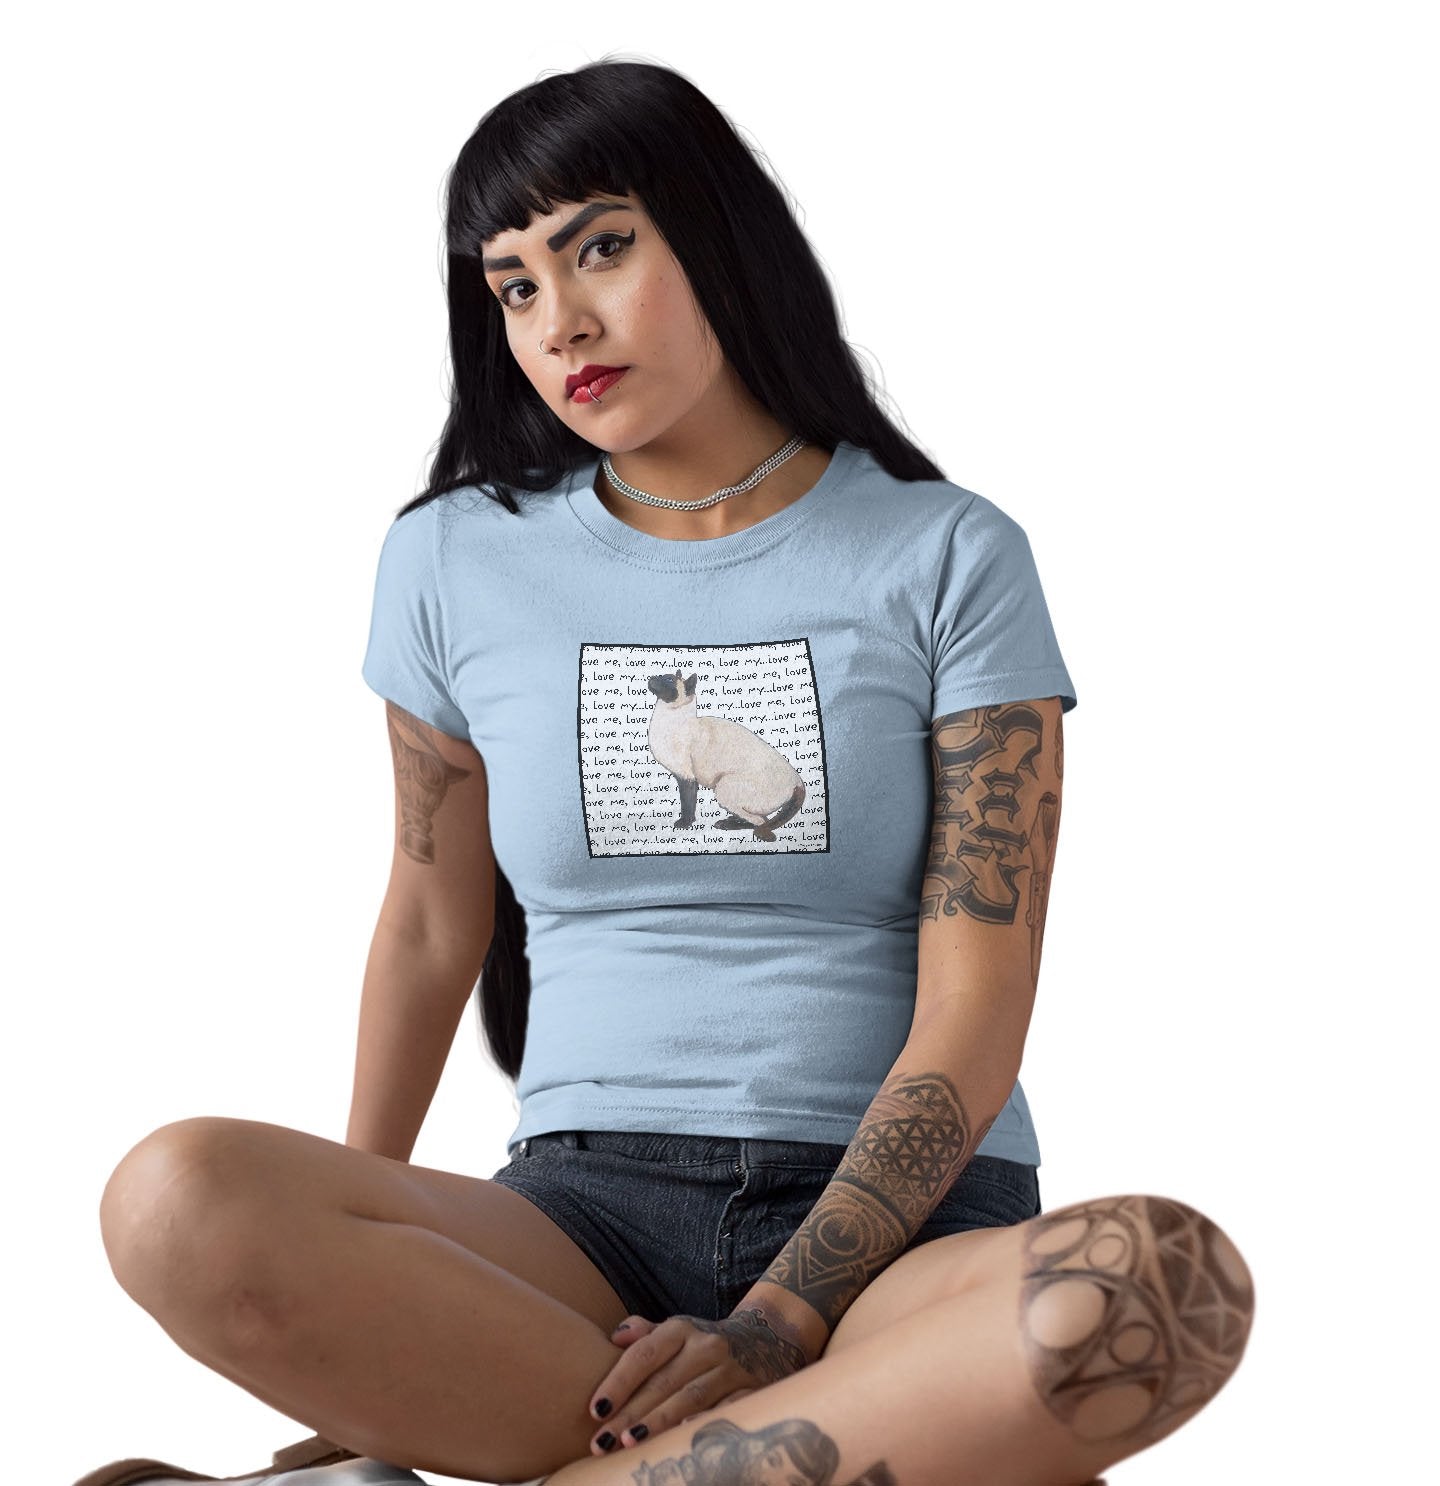 Siamese Love Text - Women's Fitted T-Shirt